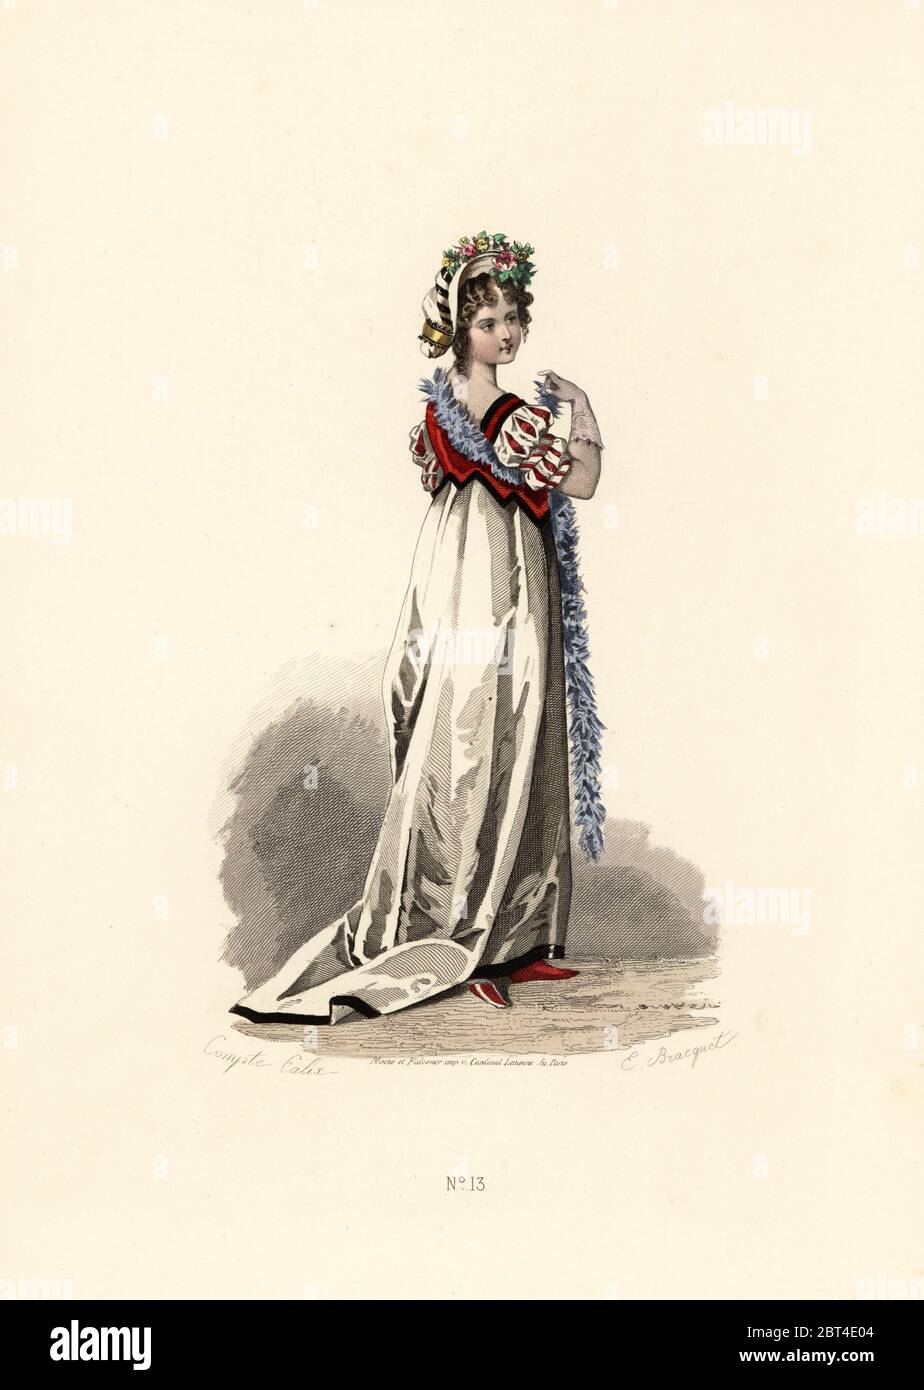 Woman in white dress with black velvet trim, red waistcoat, blue fur sash, white hat ornamented with flowers. Handcoloured lithograph by E. Bracquet after an illustration by Francois-Claudius Compte-Calix from Les Modes Parisienne sous le Directoire Aux Bureaux des Modes Parisiennes, Paris, 1871. Stock Photo